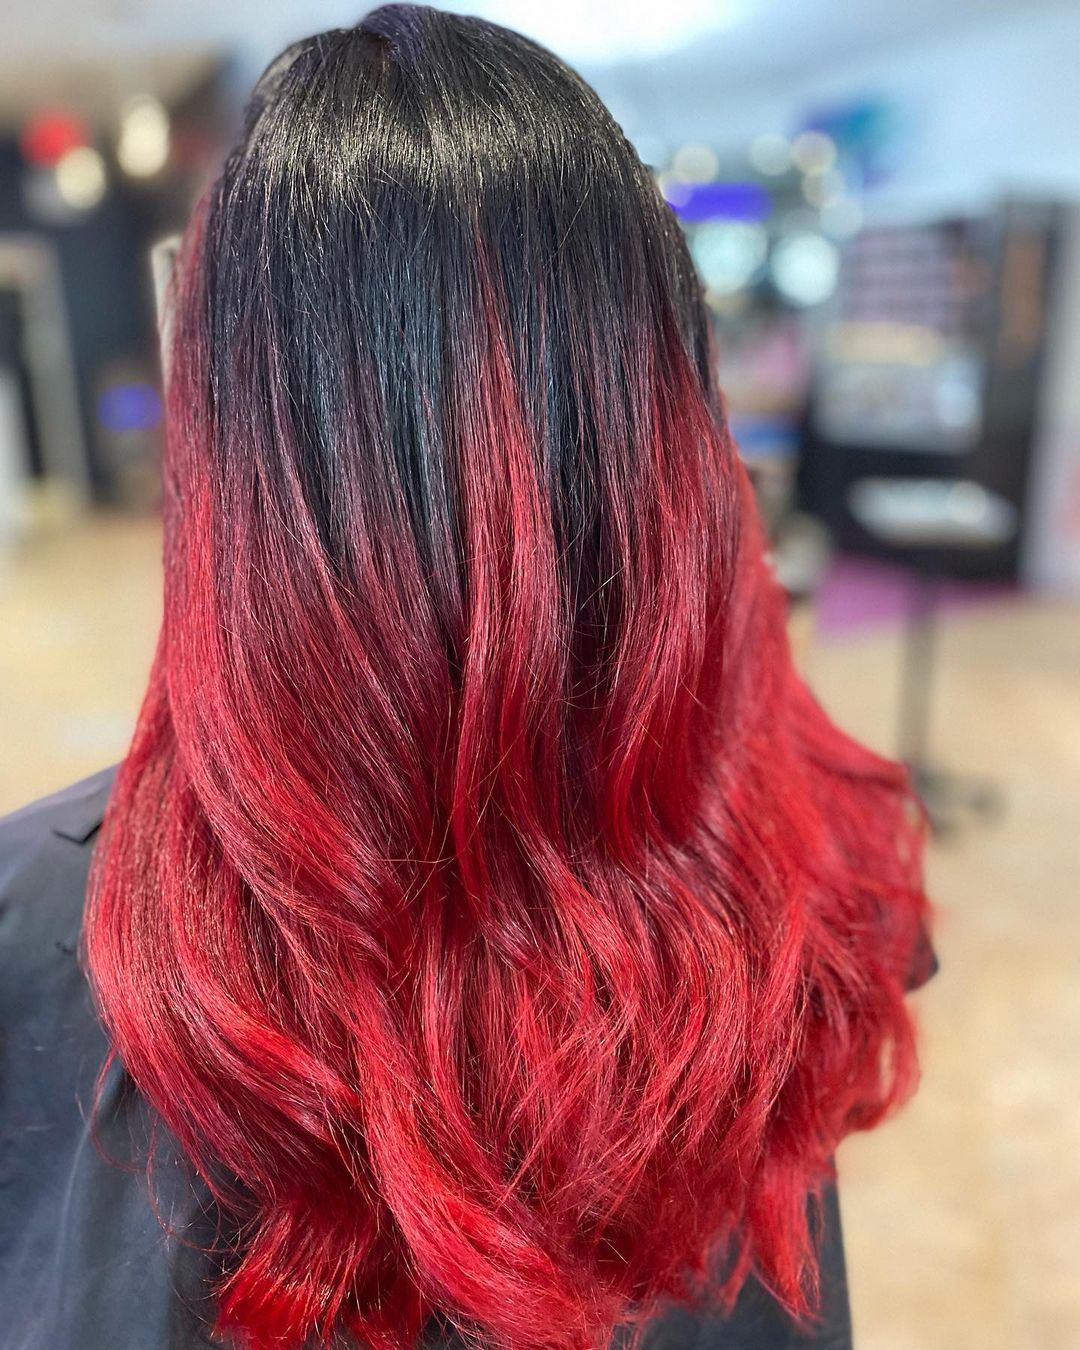 red ombre hair style 191 Natural red ombre hair | Red ombre background | Red ombre hair Red Ombre Hairstyles